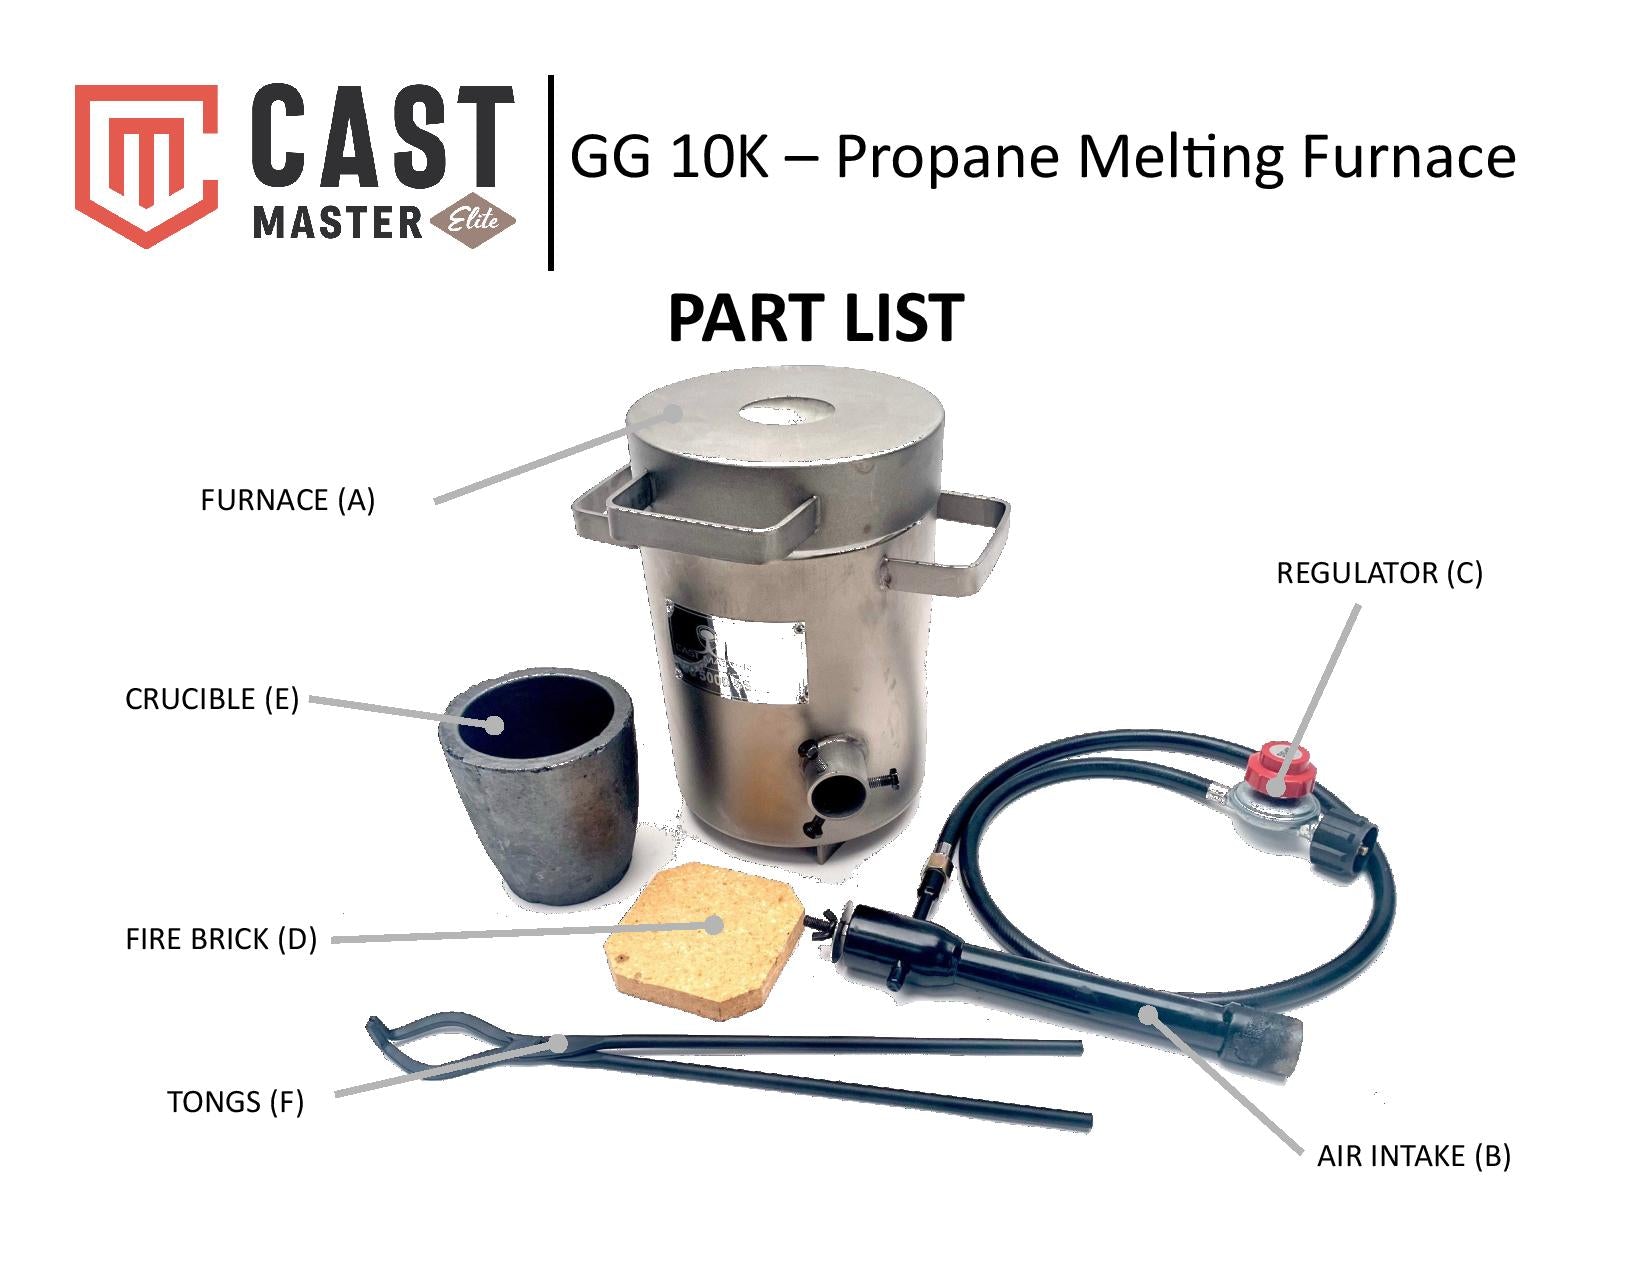 28LB/12.8KG Propane Furnace Kit with Crucible and Tongs Smelting Gold  Silver Copper 2700°F/1482°C Kiln Melting Casting Forge Set - AliExpress